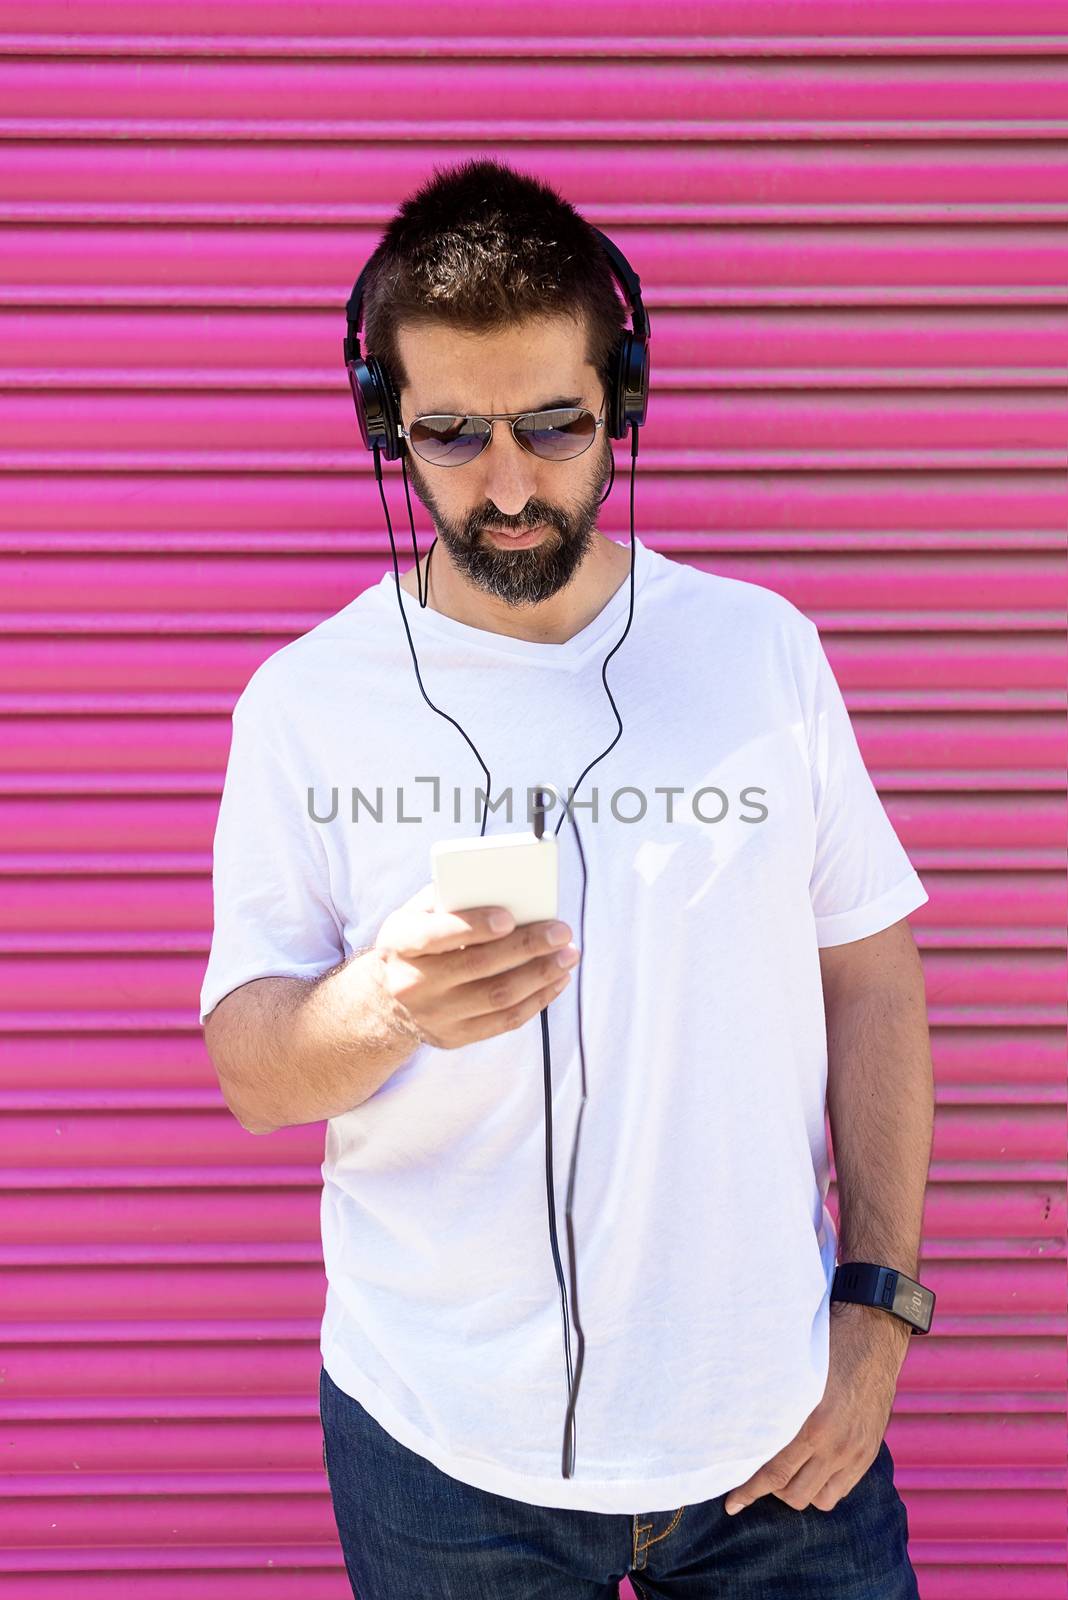 Bearded man with headphones and sunglasses using a smartphone while listening music by raferto1973